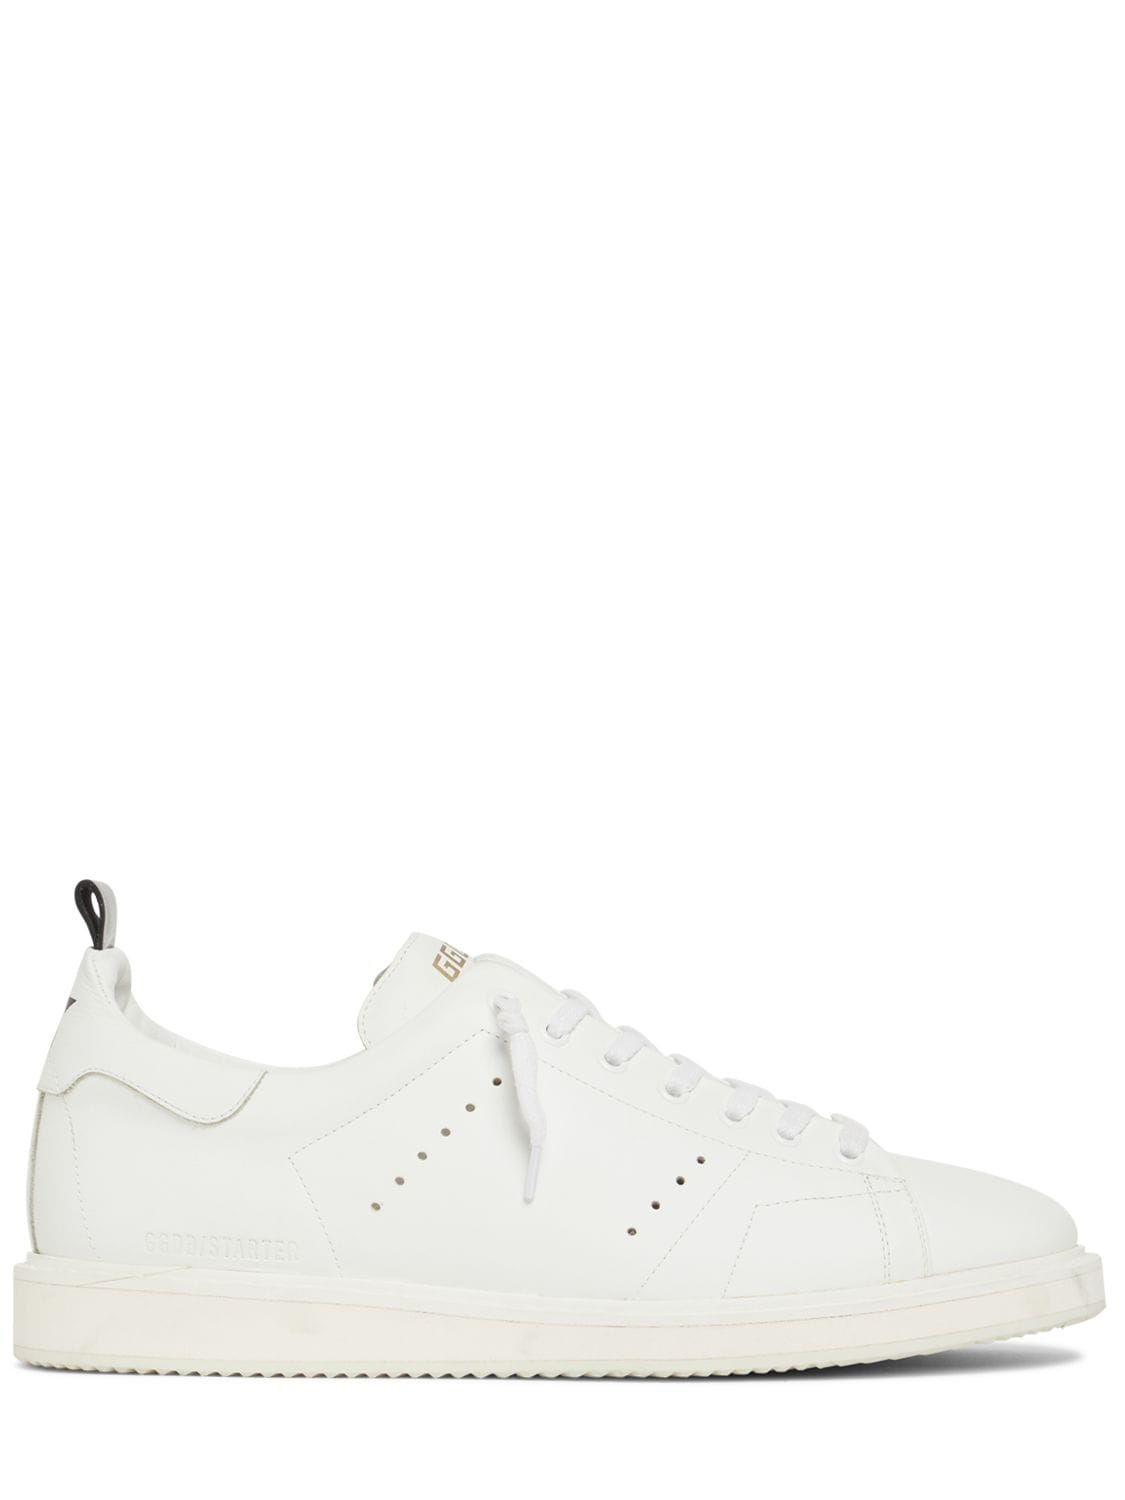 Golden Goose Starter Leather Sneakers In Optic White